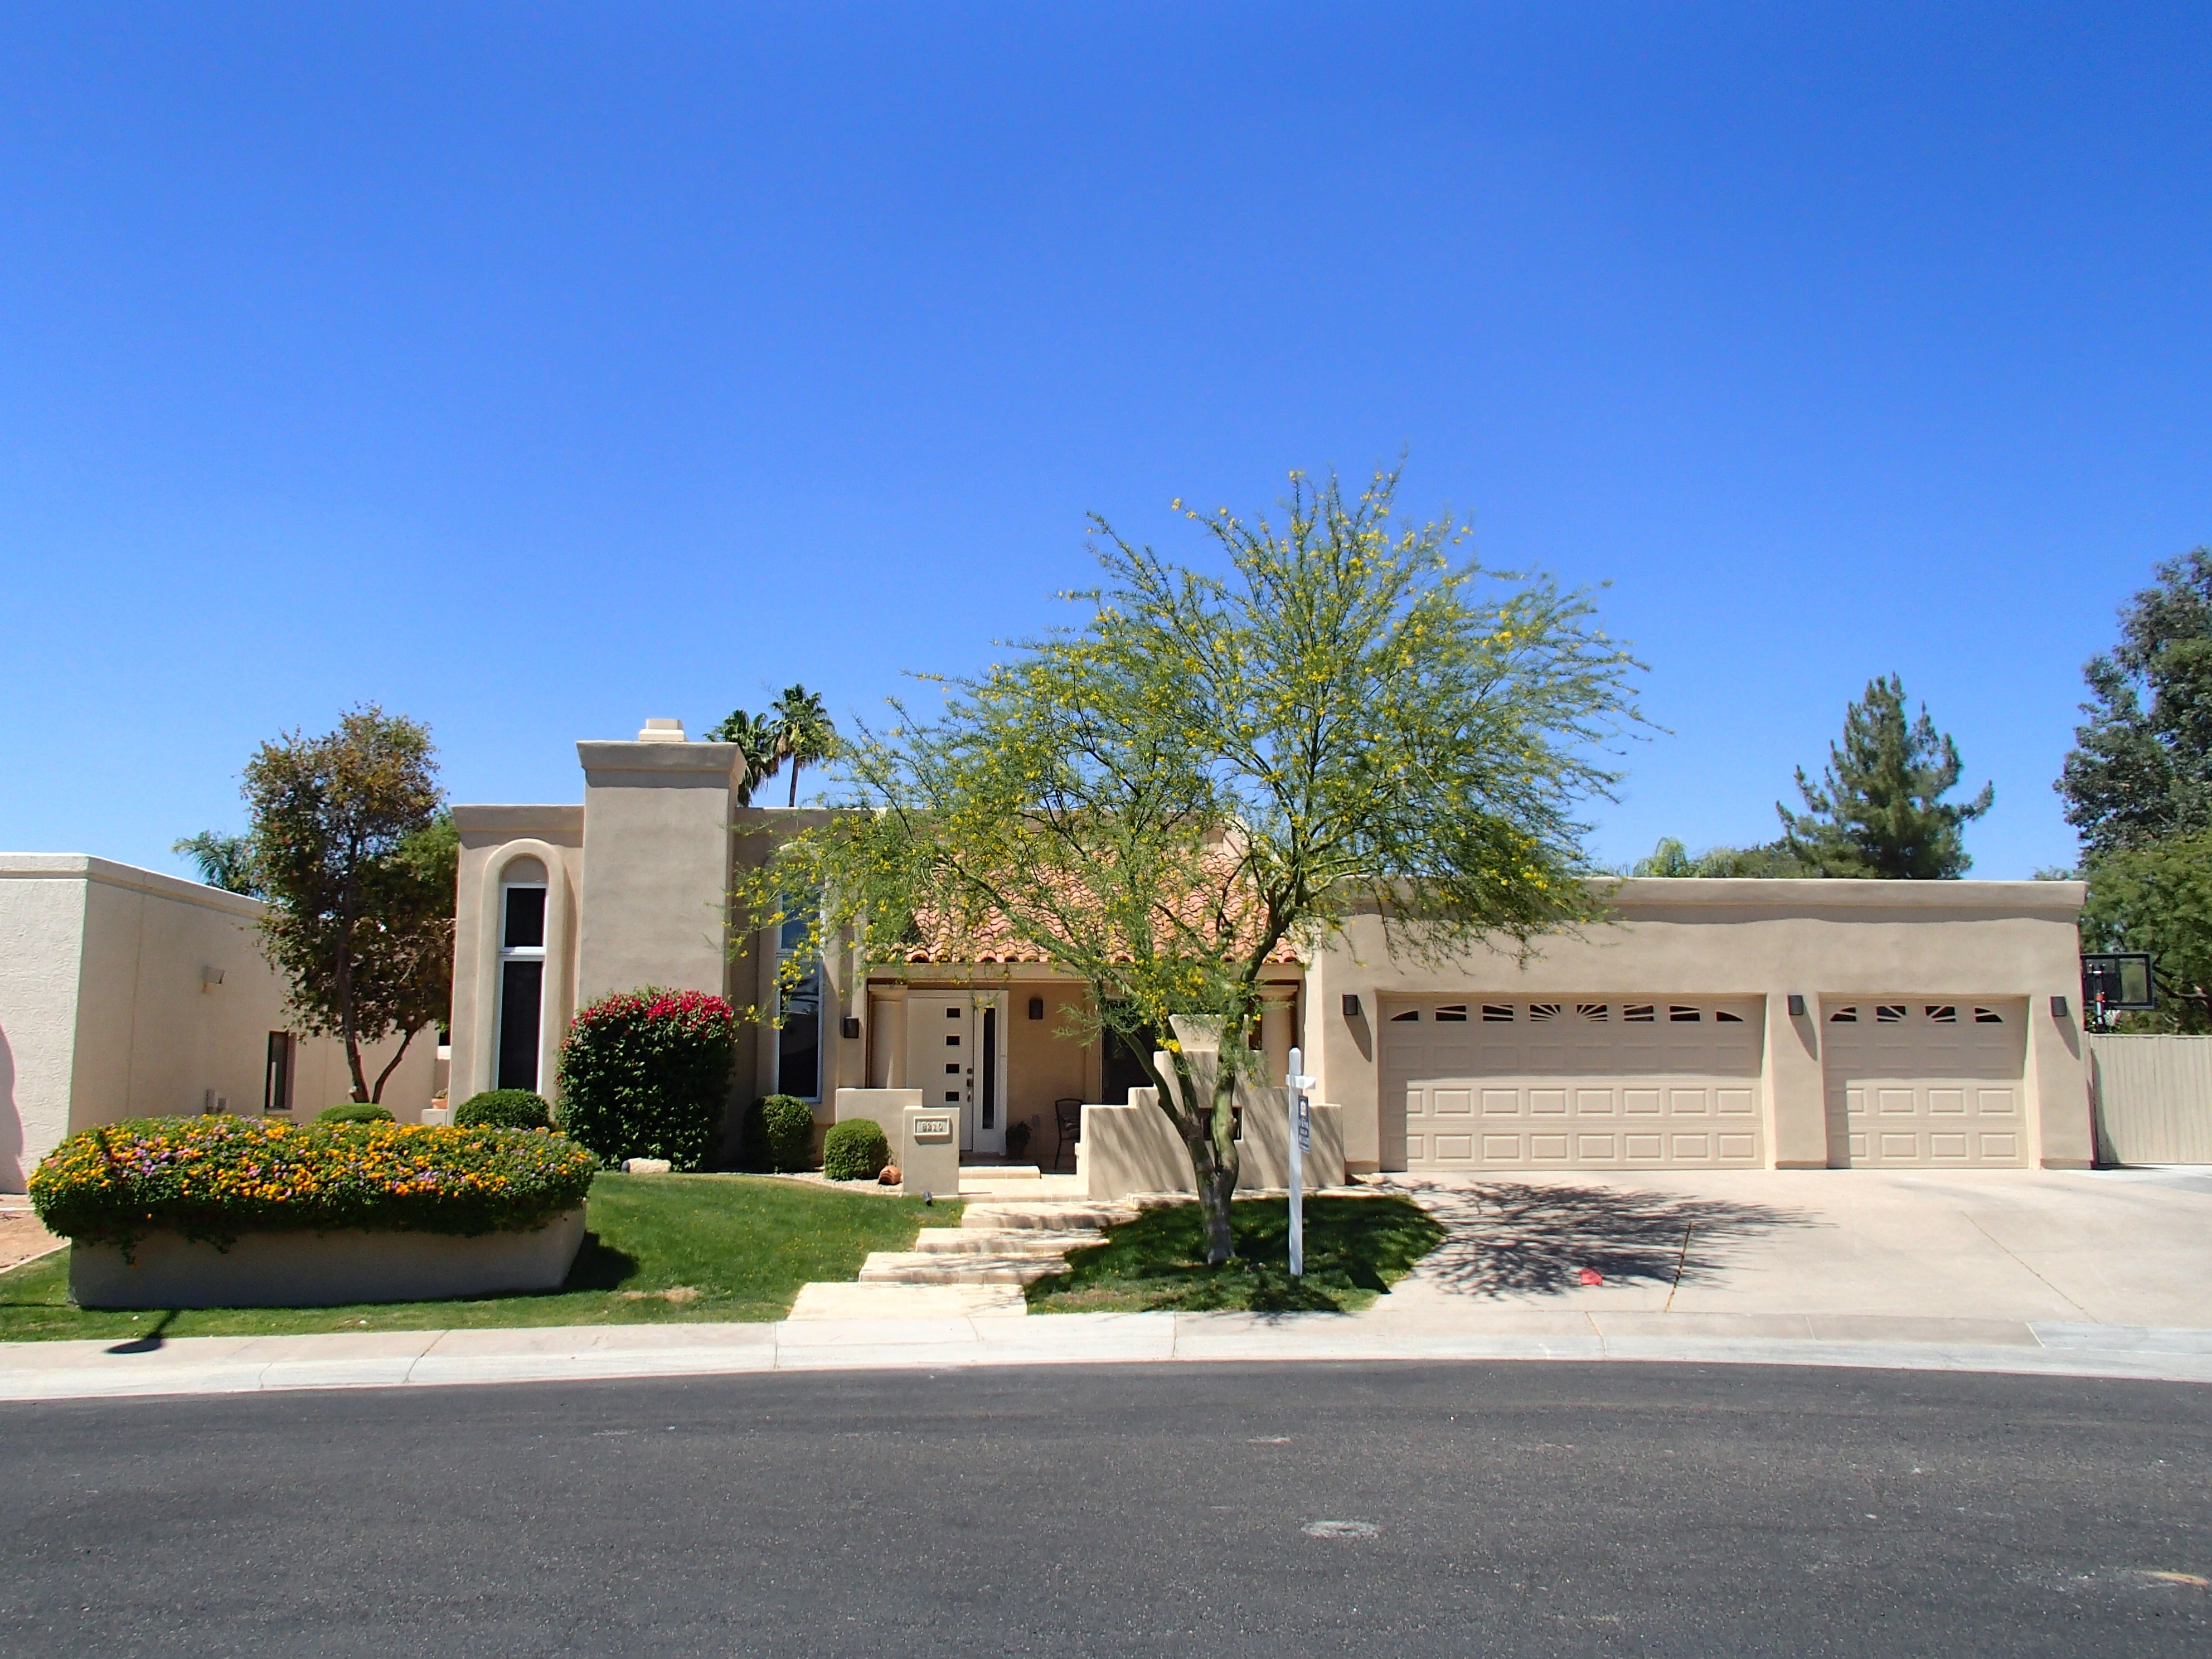 McCormick Ranch Open House 6/7 & 6/8